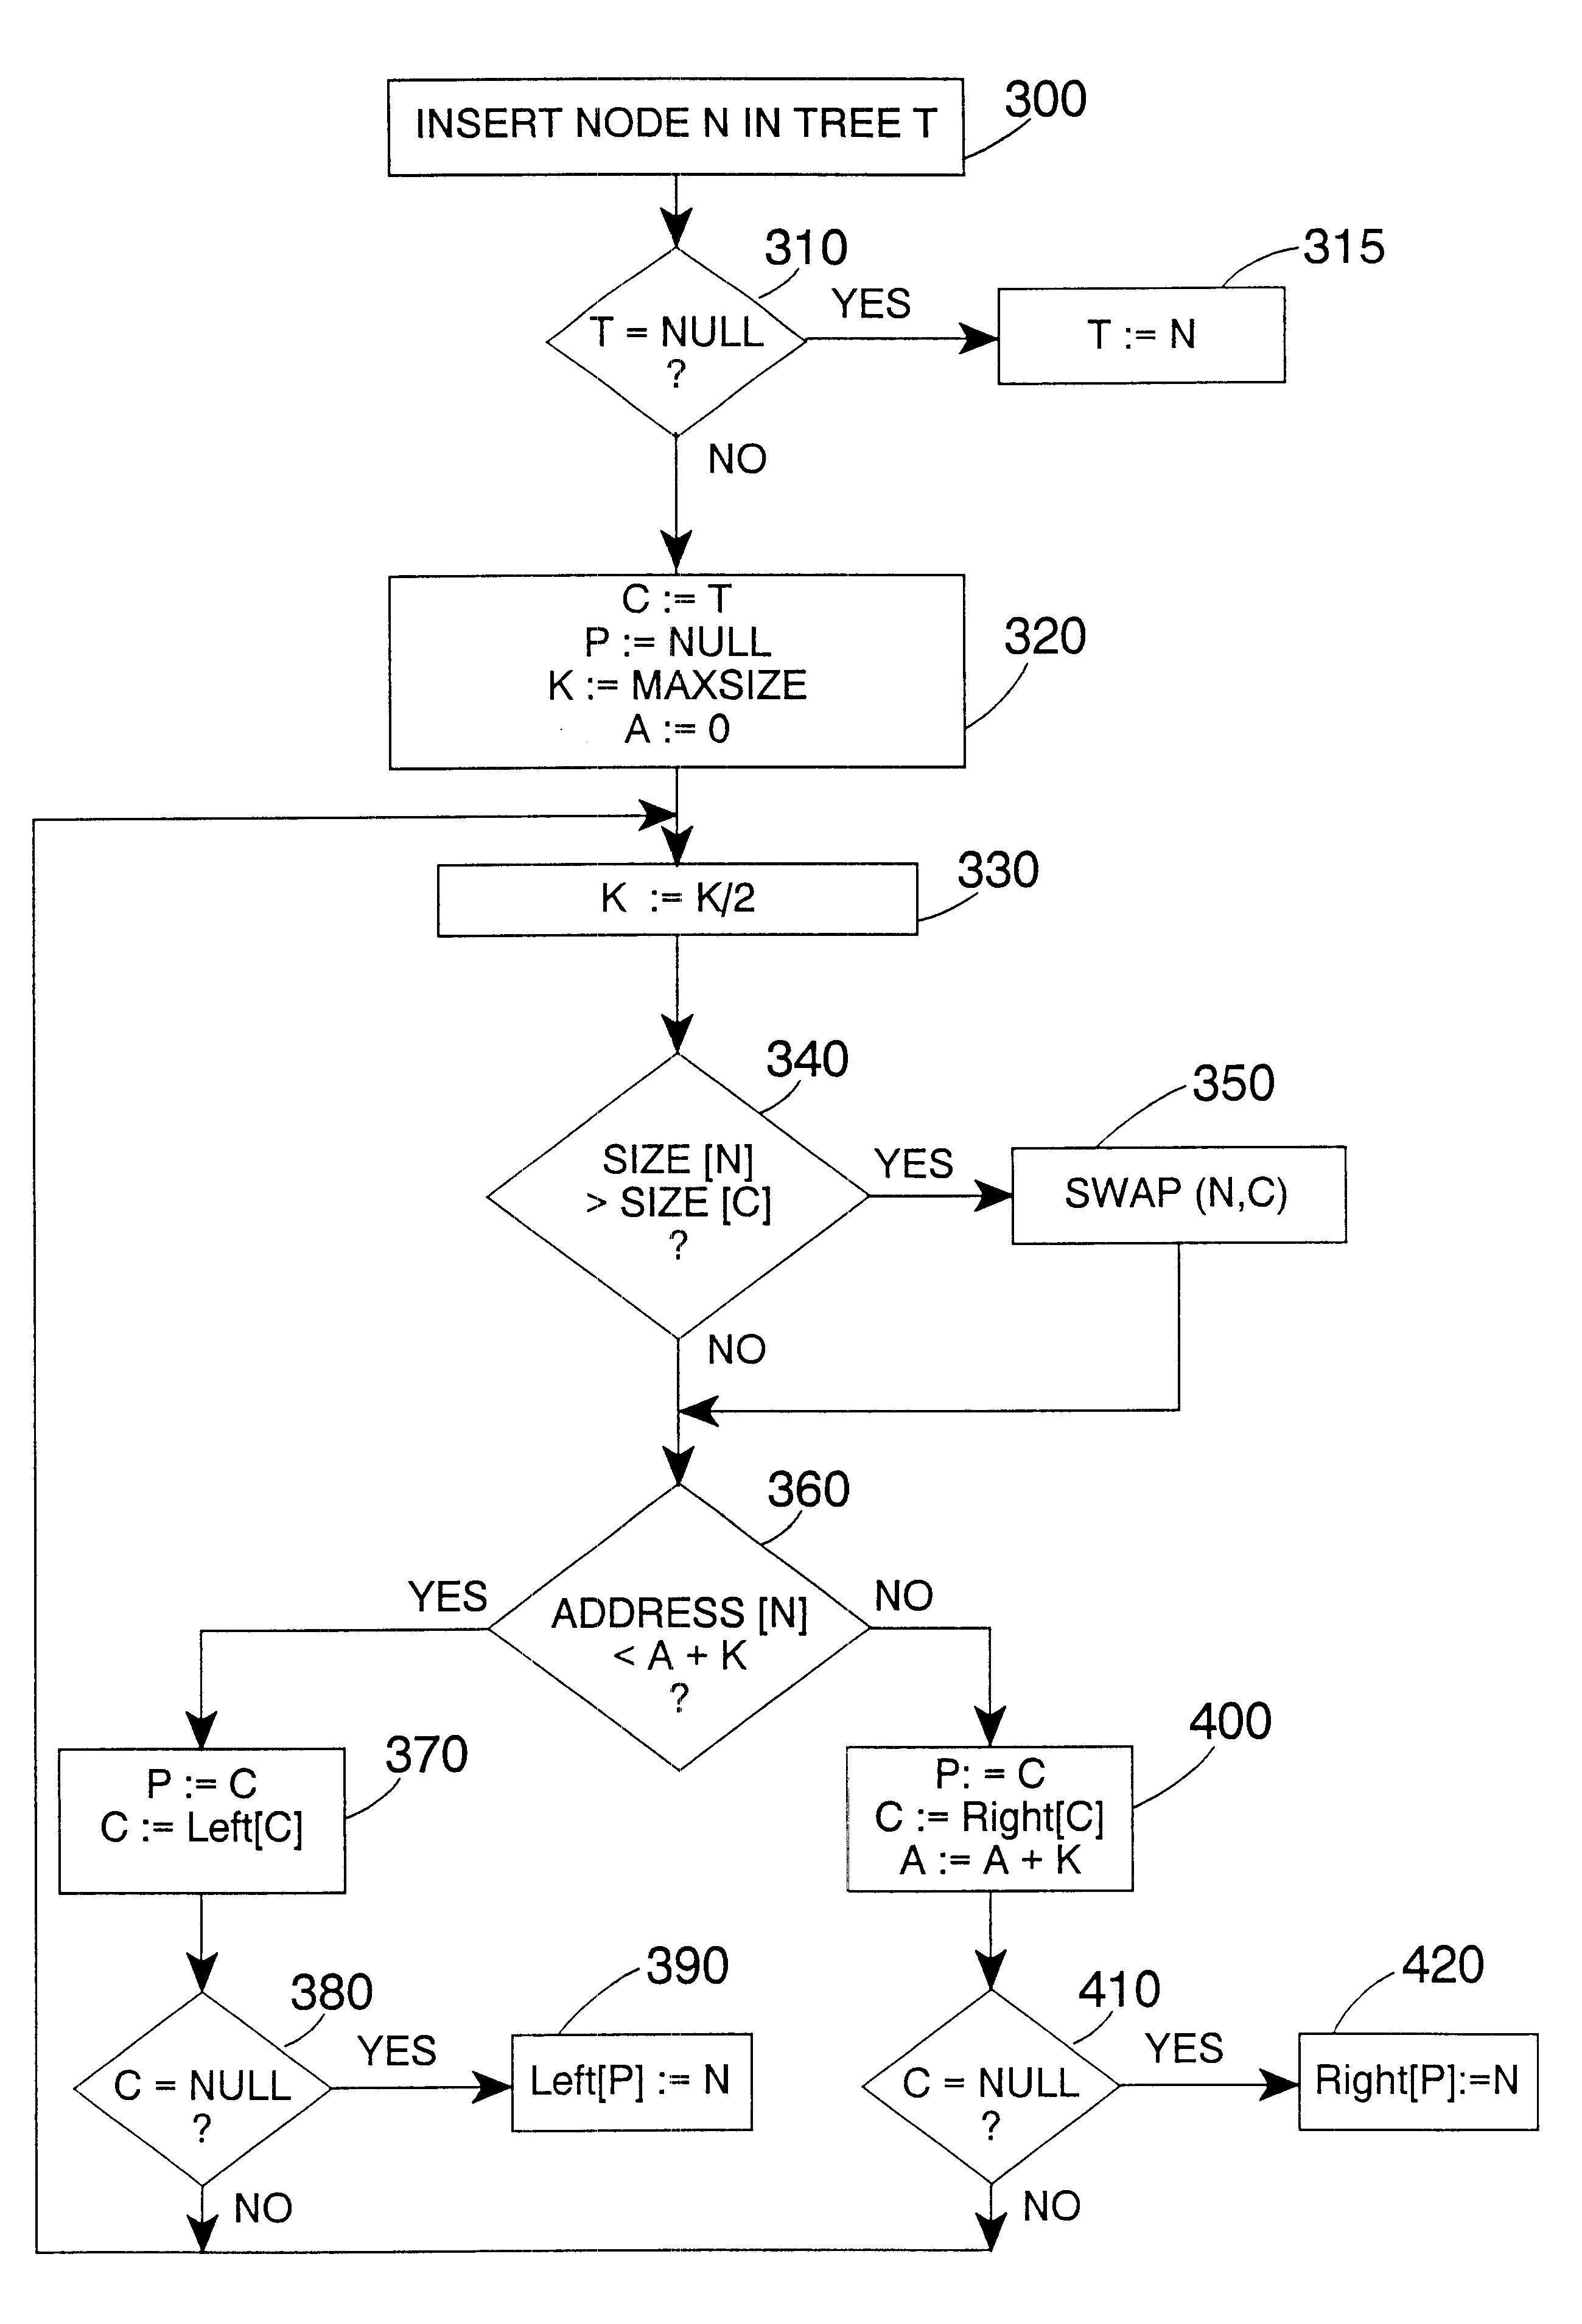 System and method of organizing nodes within a tree structure